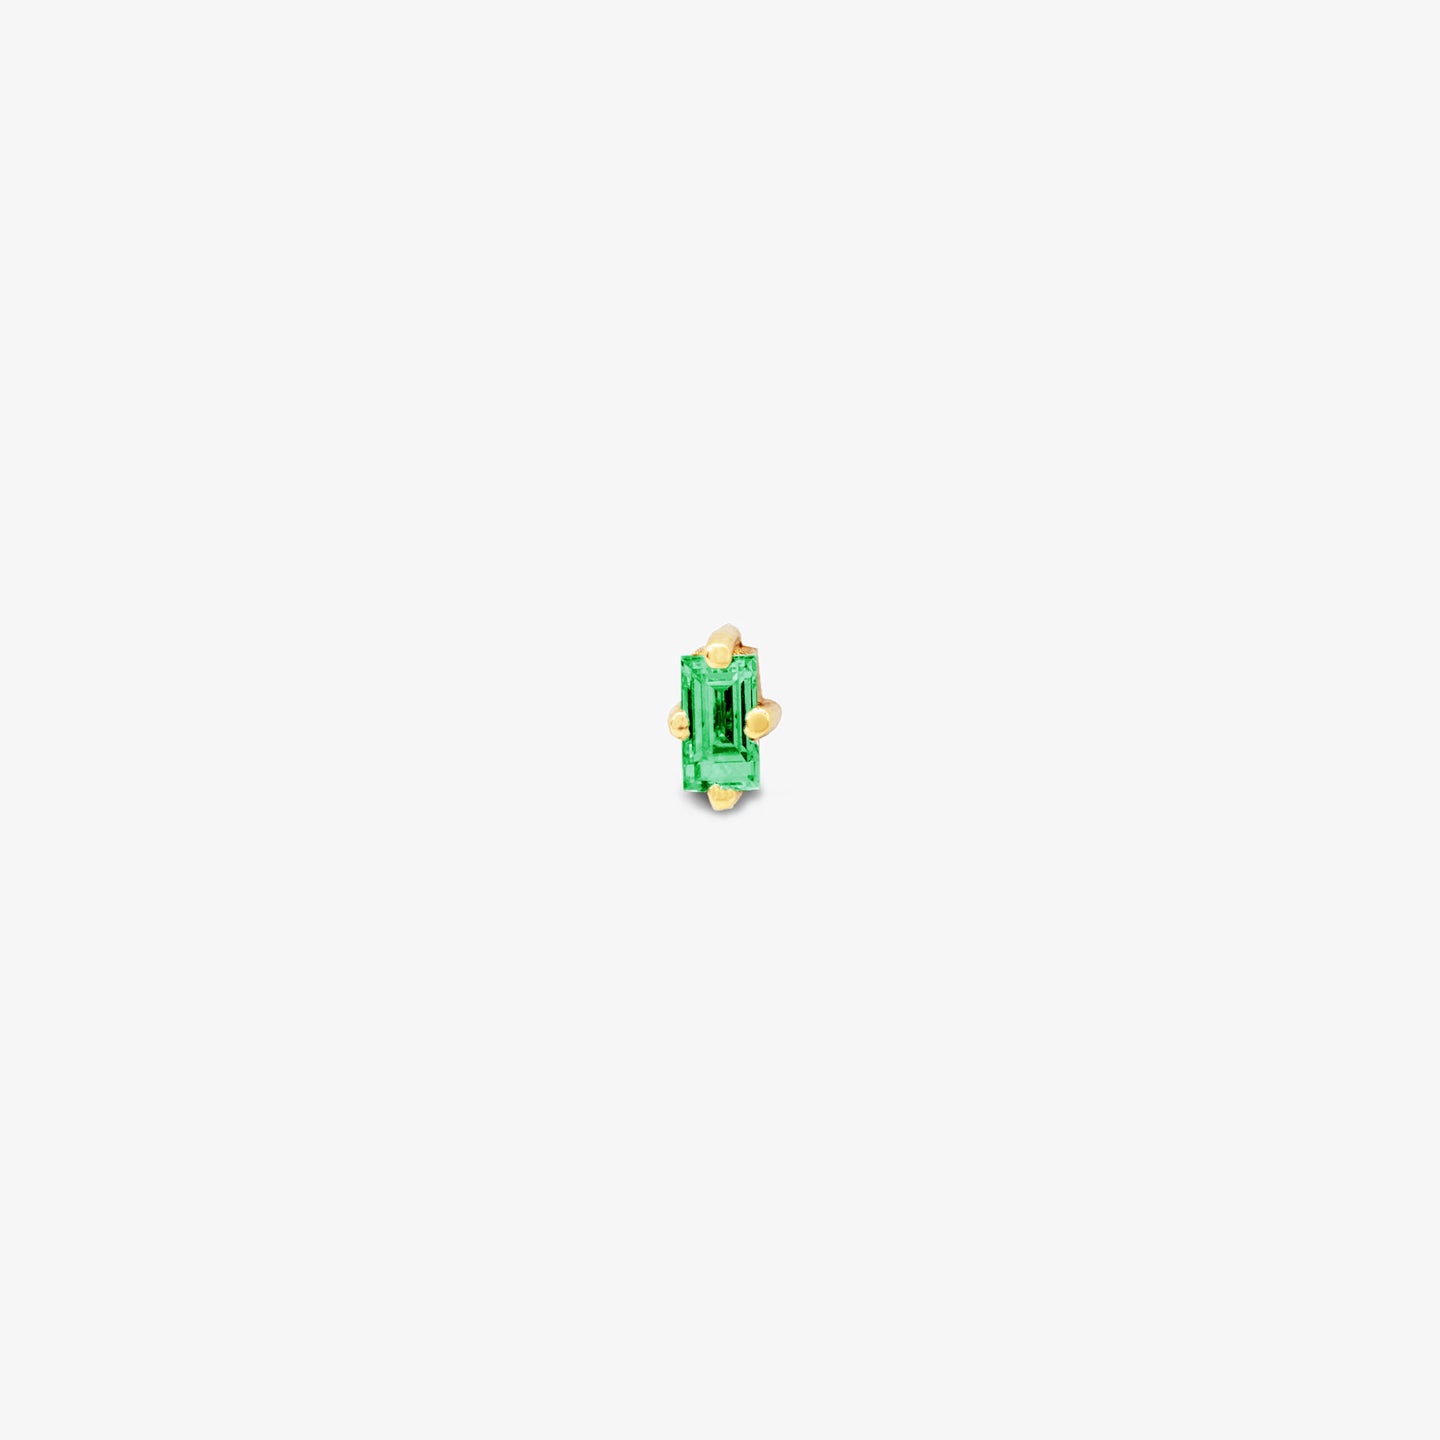 This is a small 18k gold stud with a square cut emerald color:18k gold/emerald